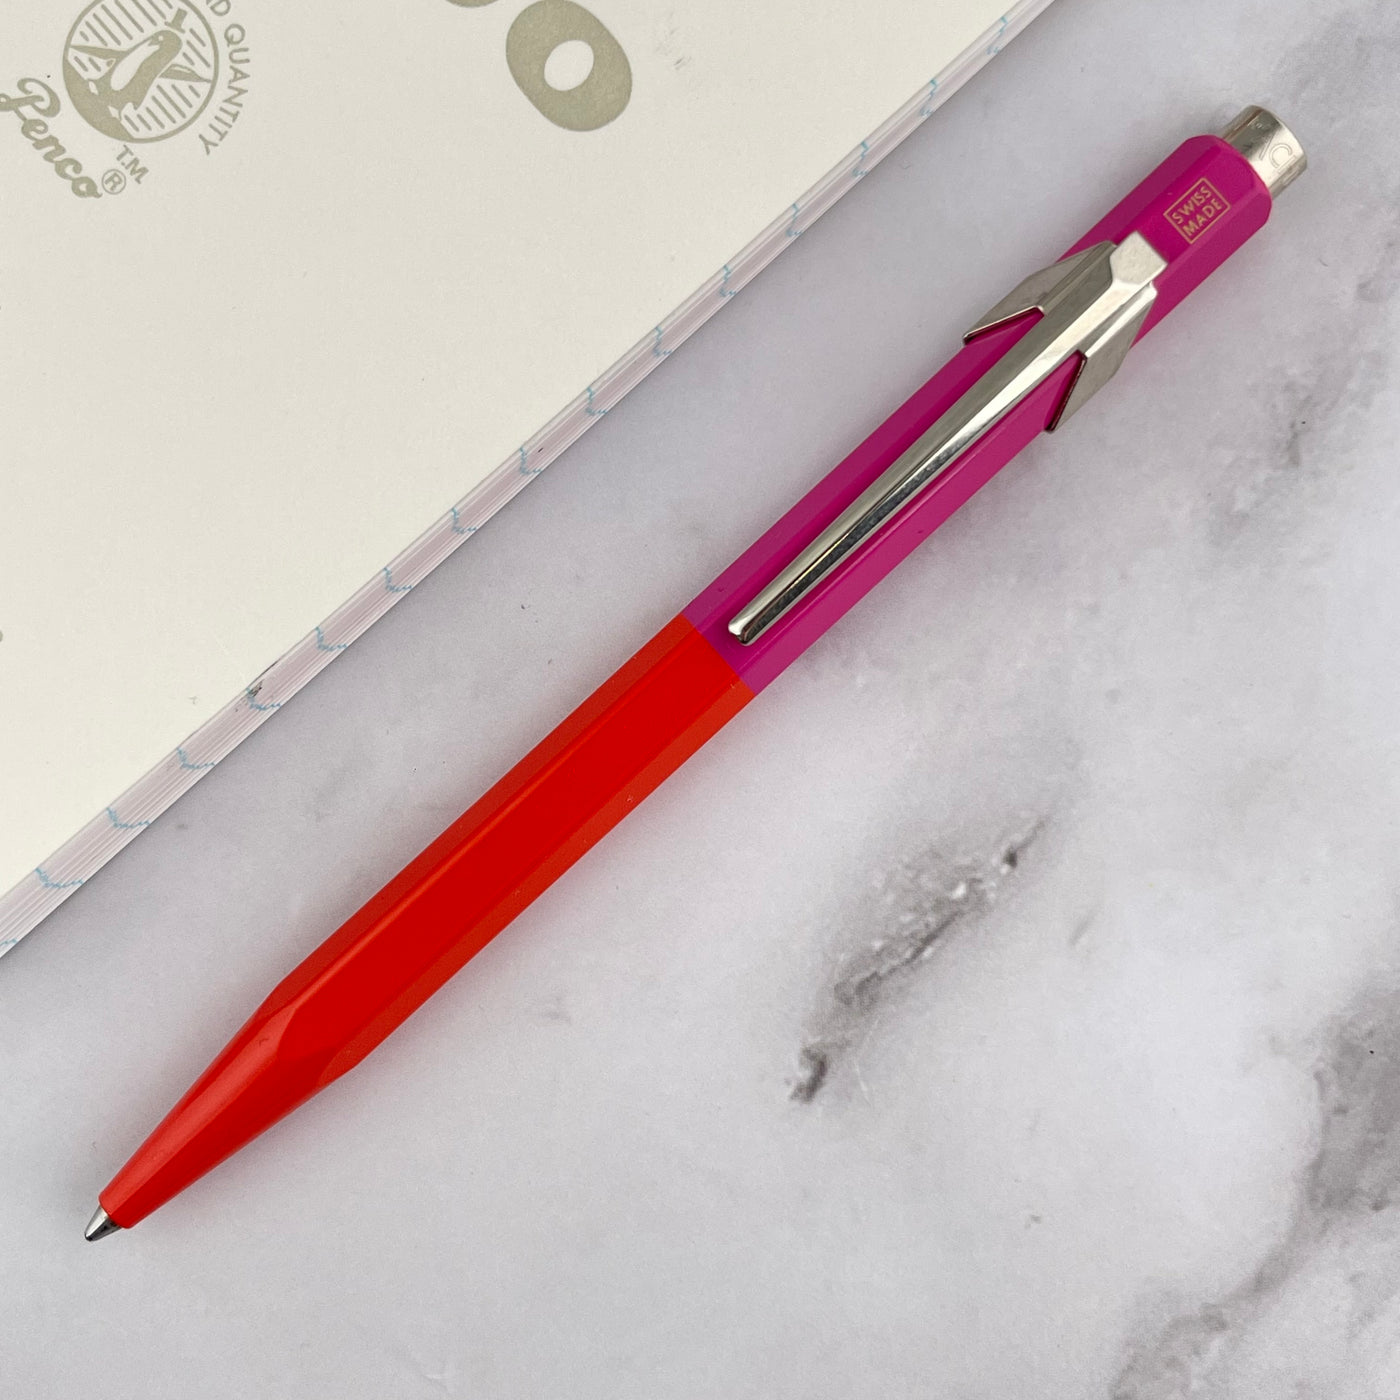 Caran d'Ache Paul Smith 849 Ballpoint Pen - Warm Red / Melrose Pink (Special Edition)